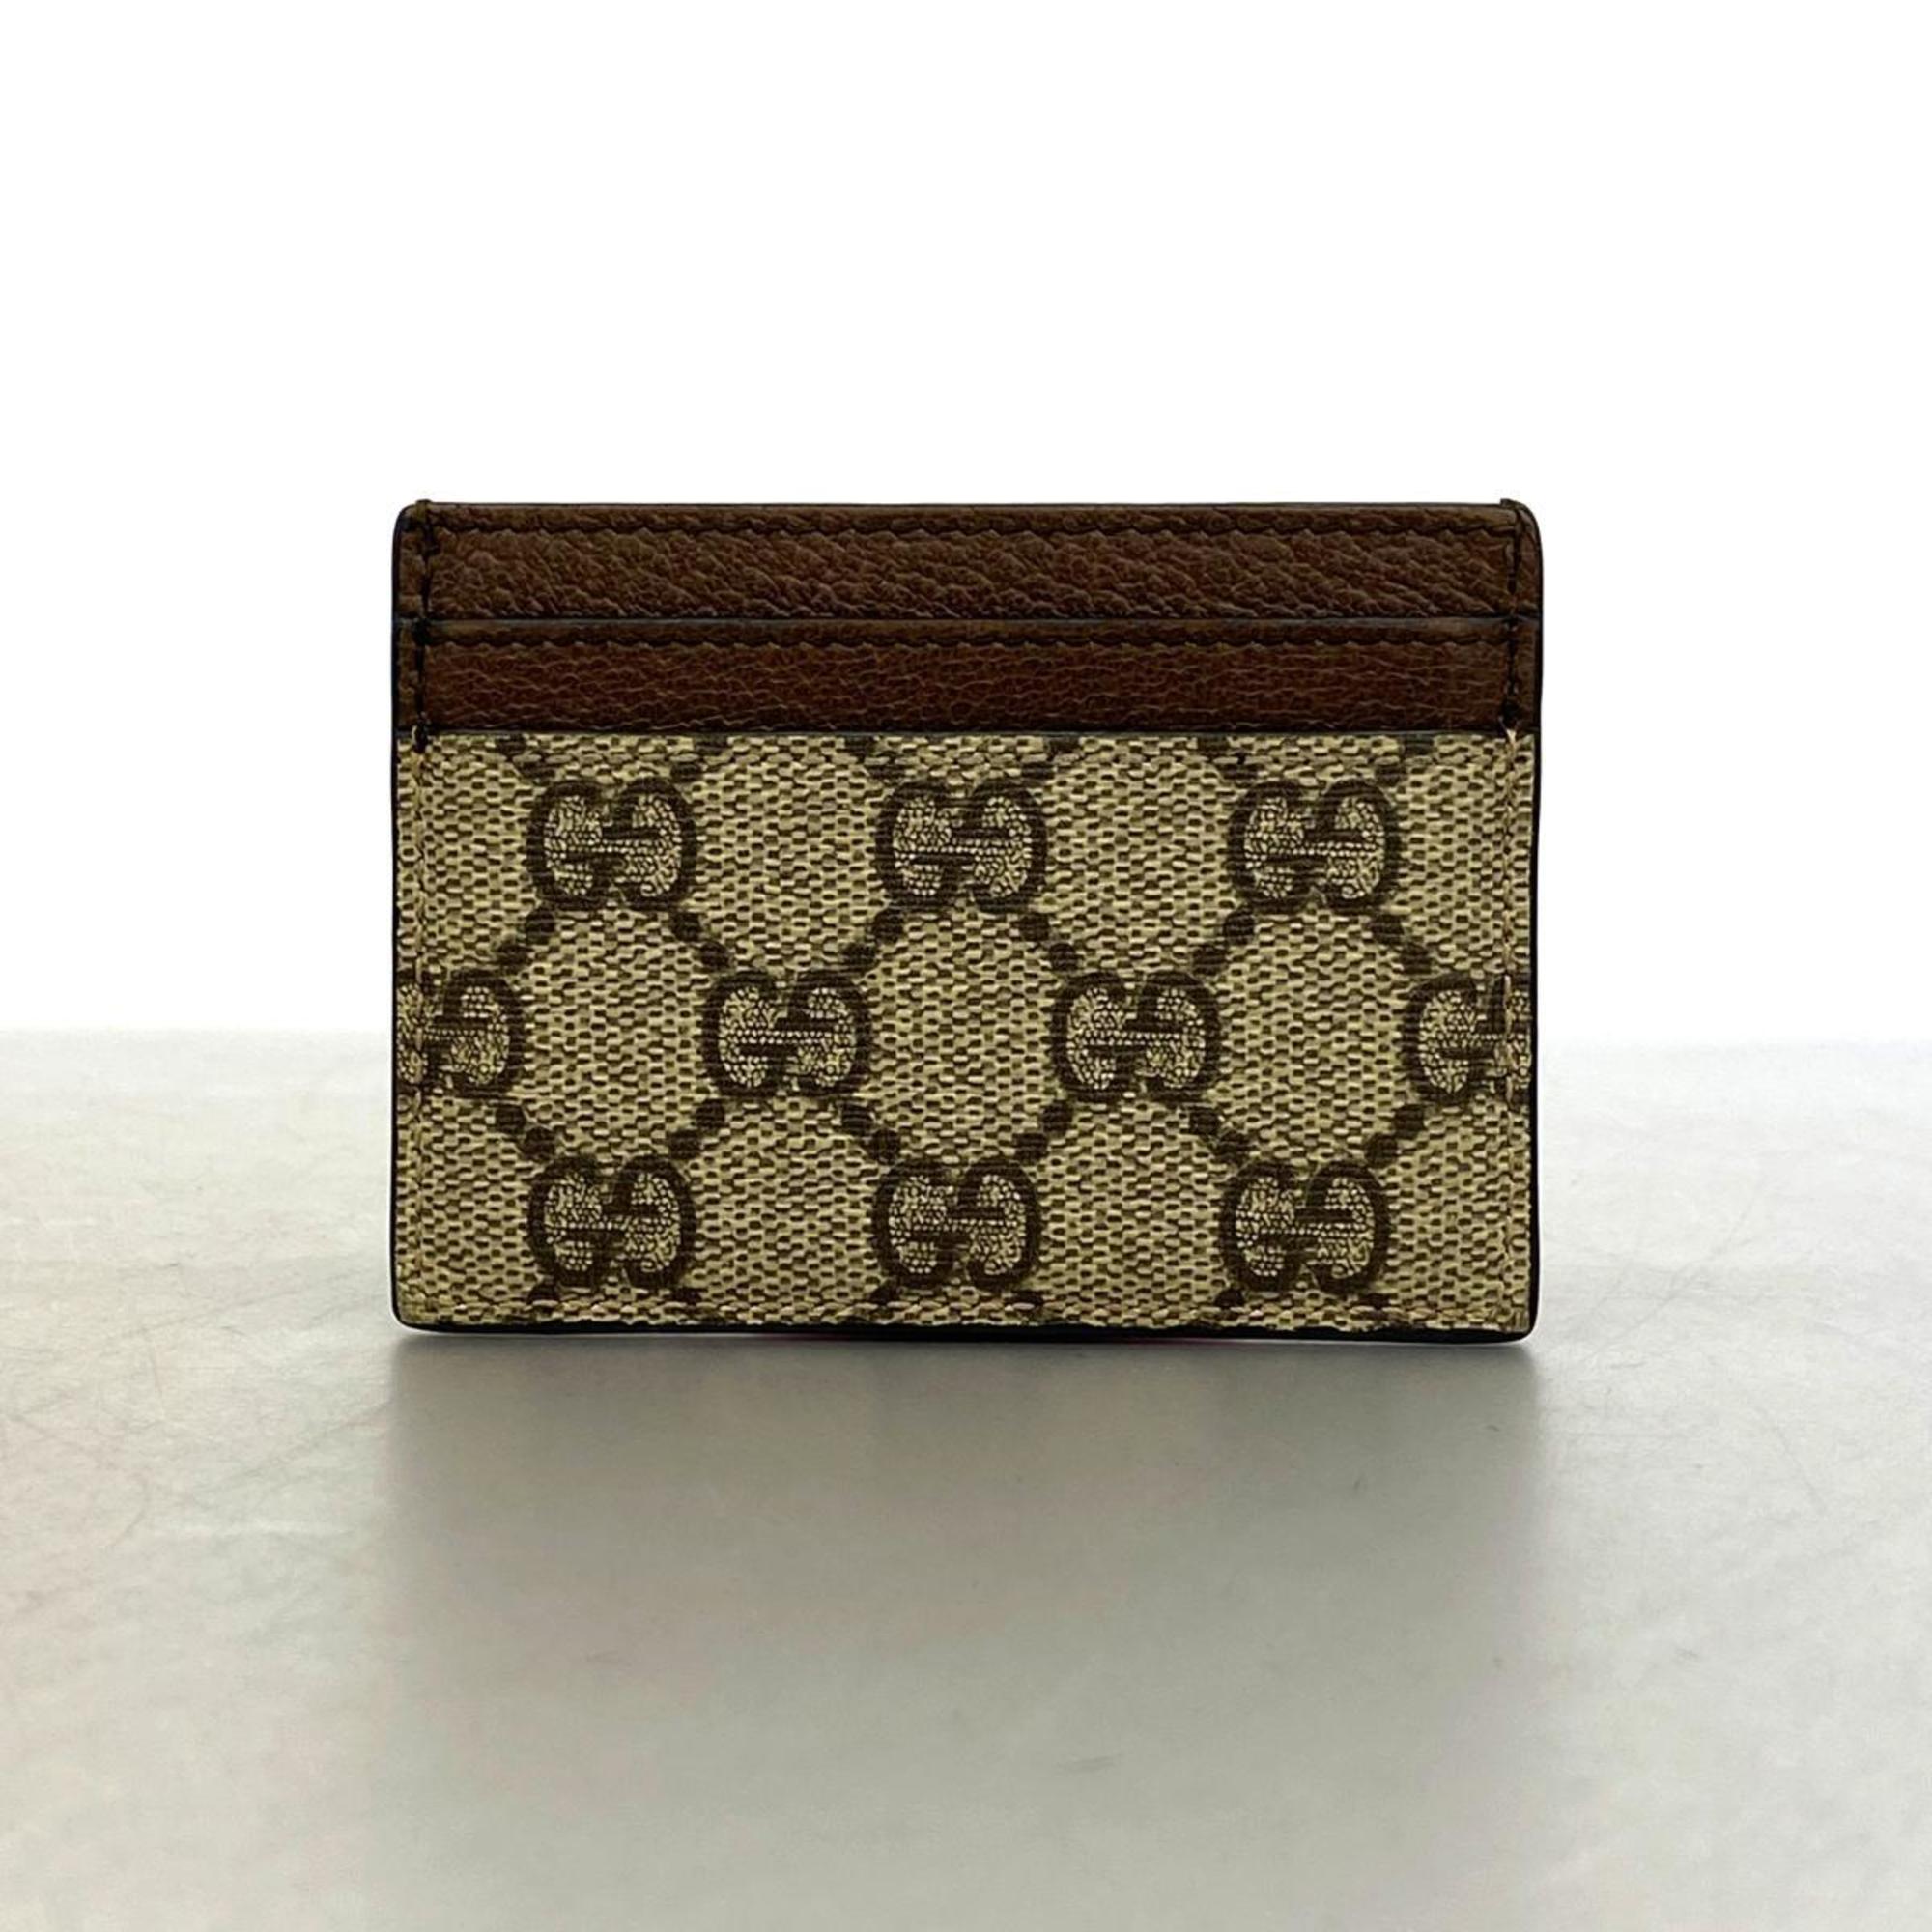 Gucci Business Card Holder/Card Case Ophidia 523159 Leather Brown Beige Women's